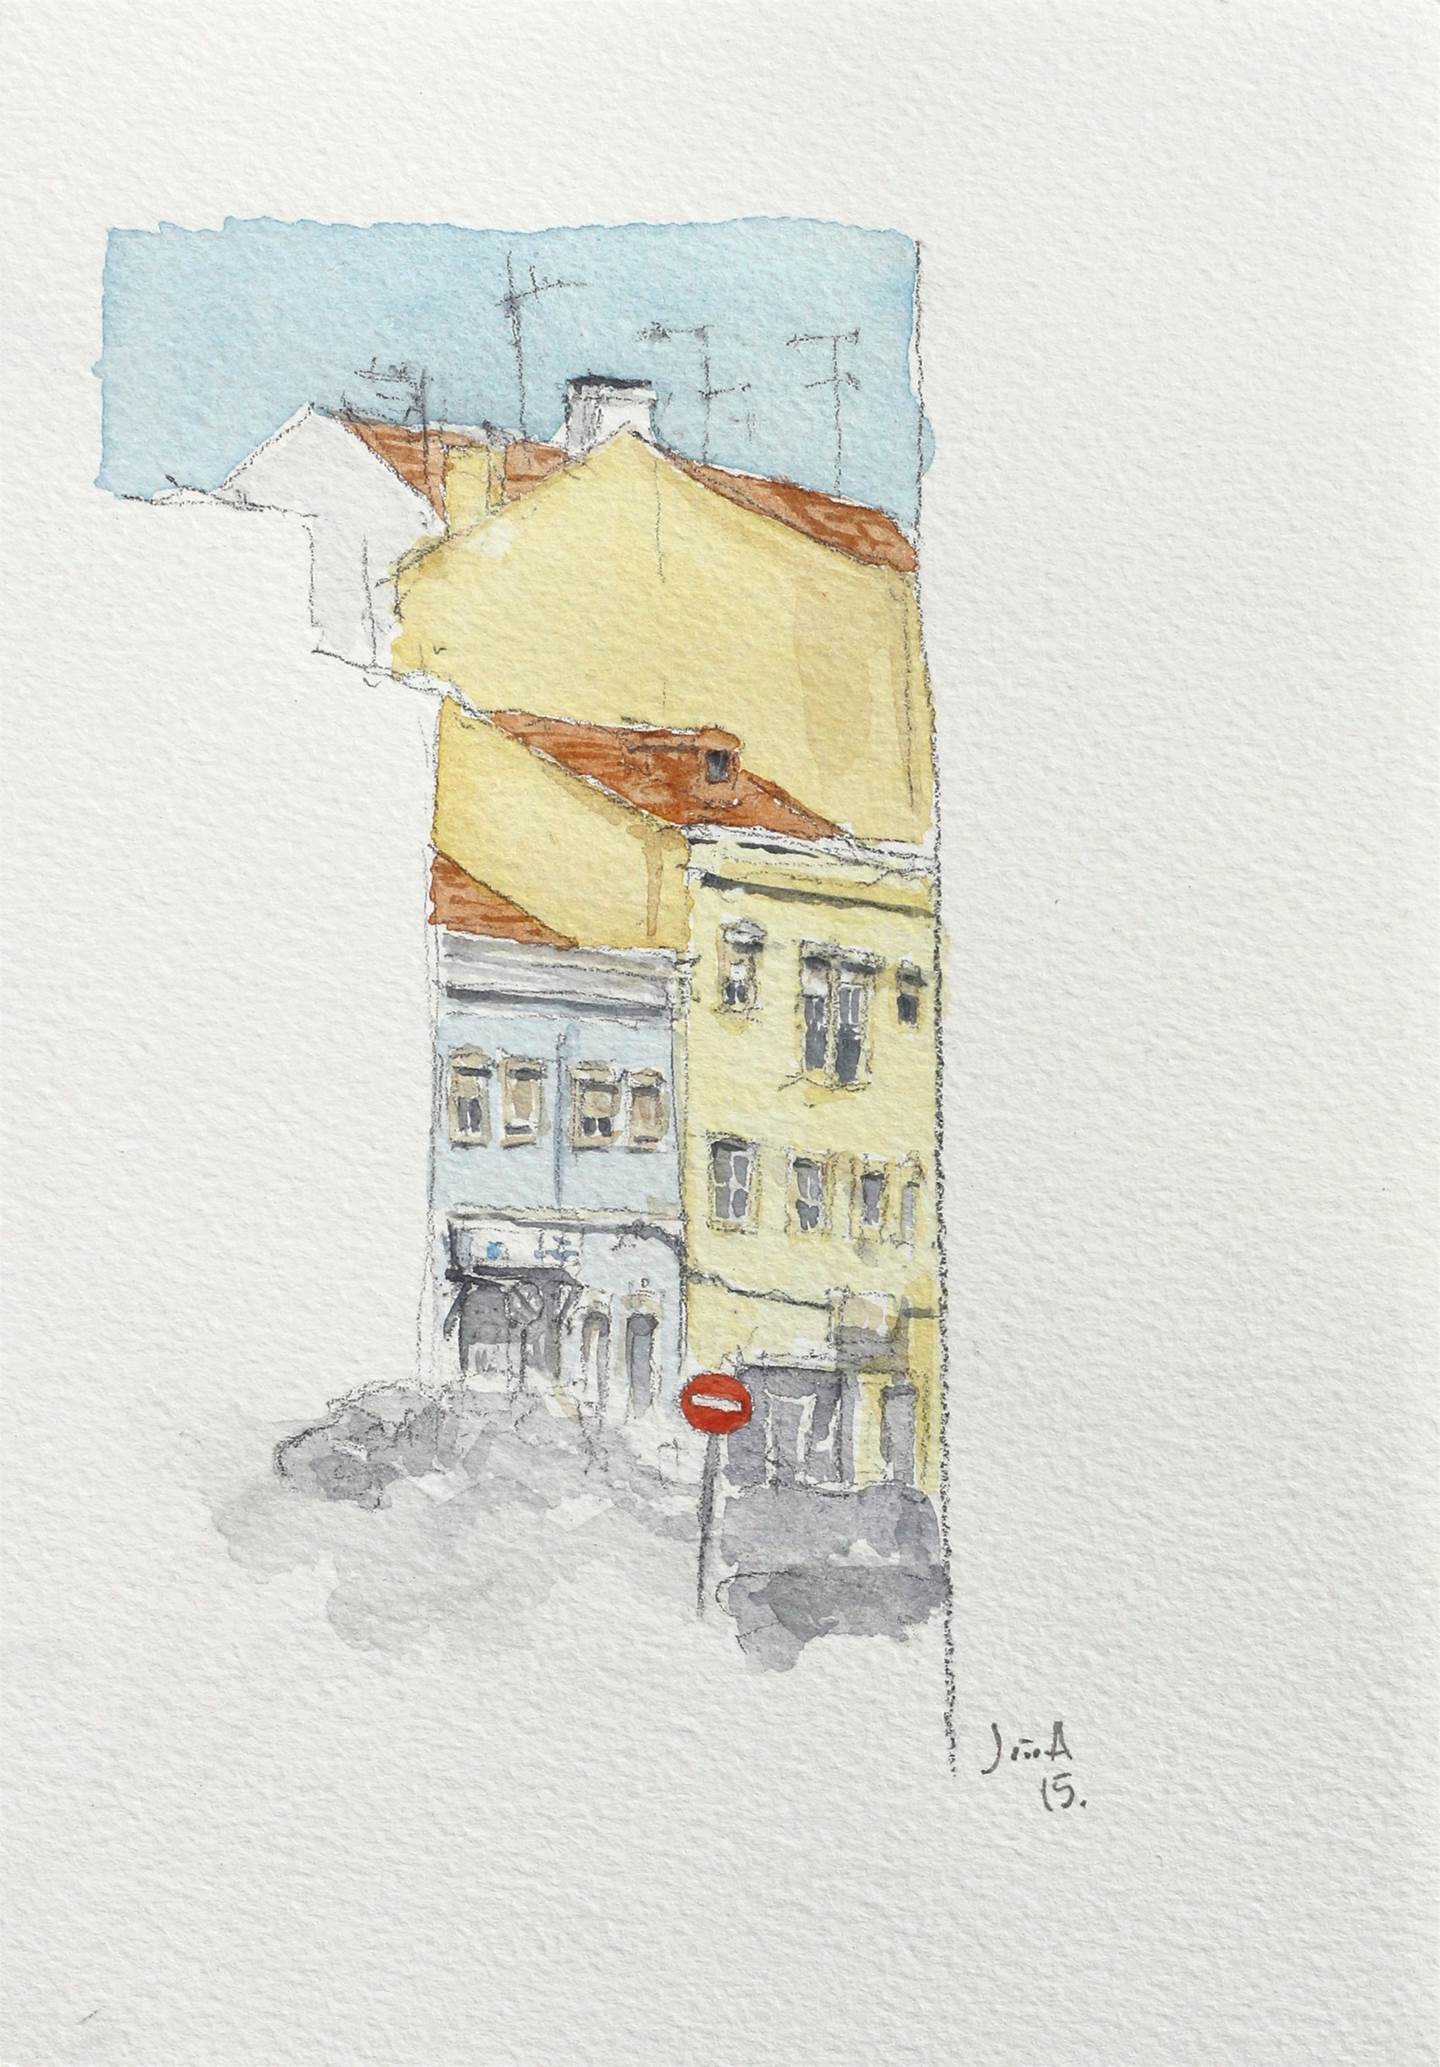 Sentido proibido, original Architecture Watercolor Drawing and Illustration by João Gil Antunes